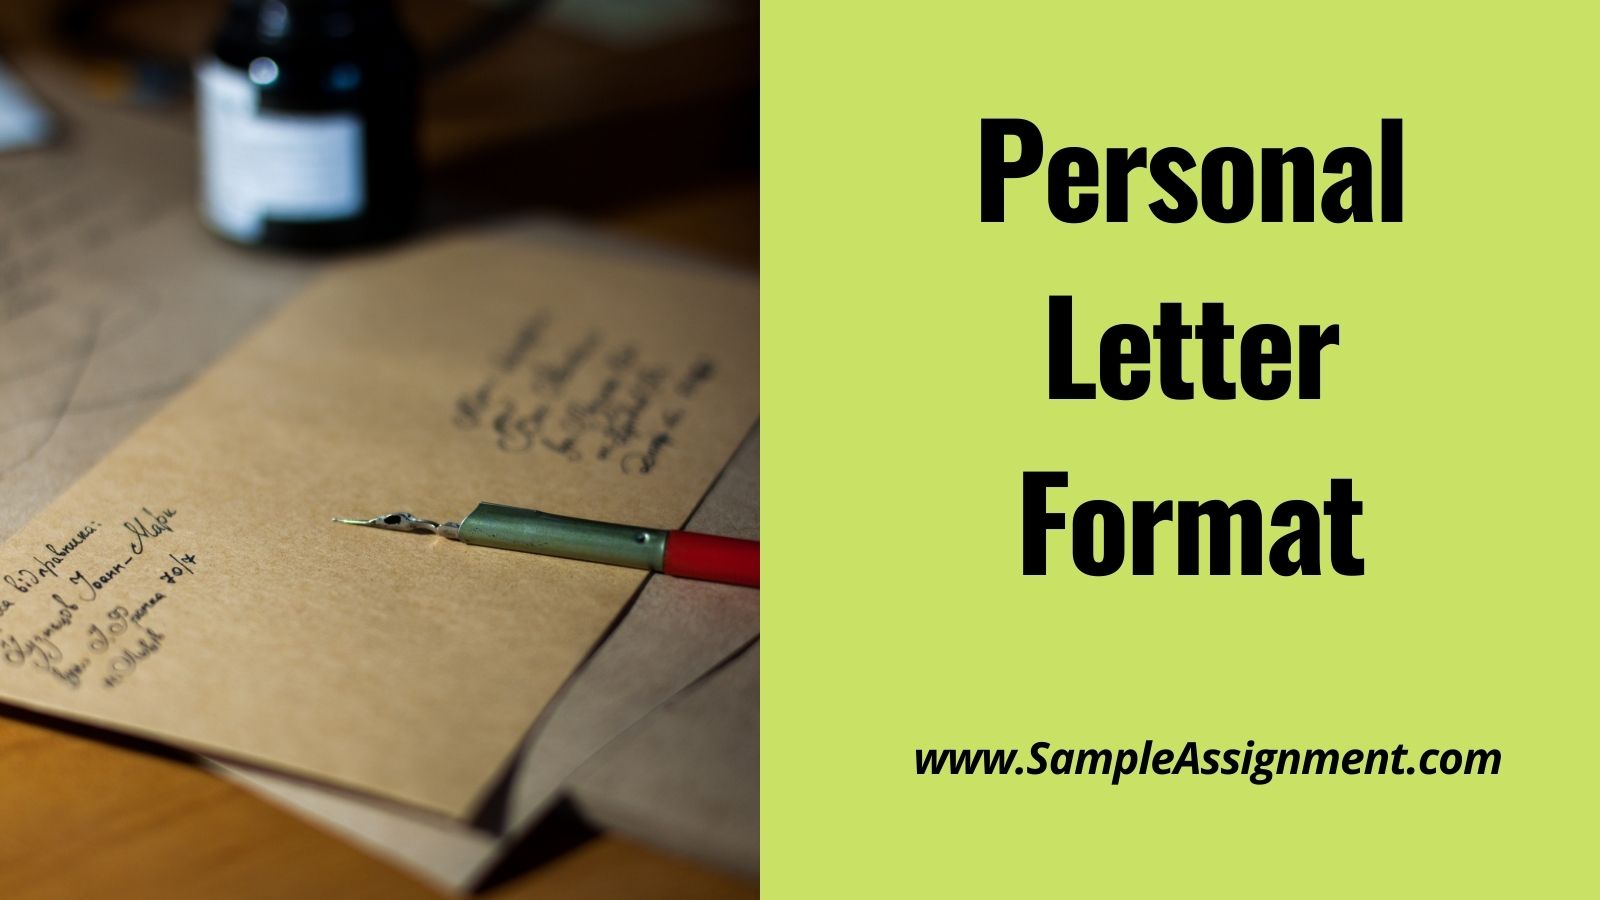 How to Format a Personal Letter